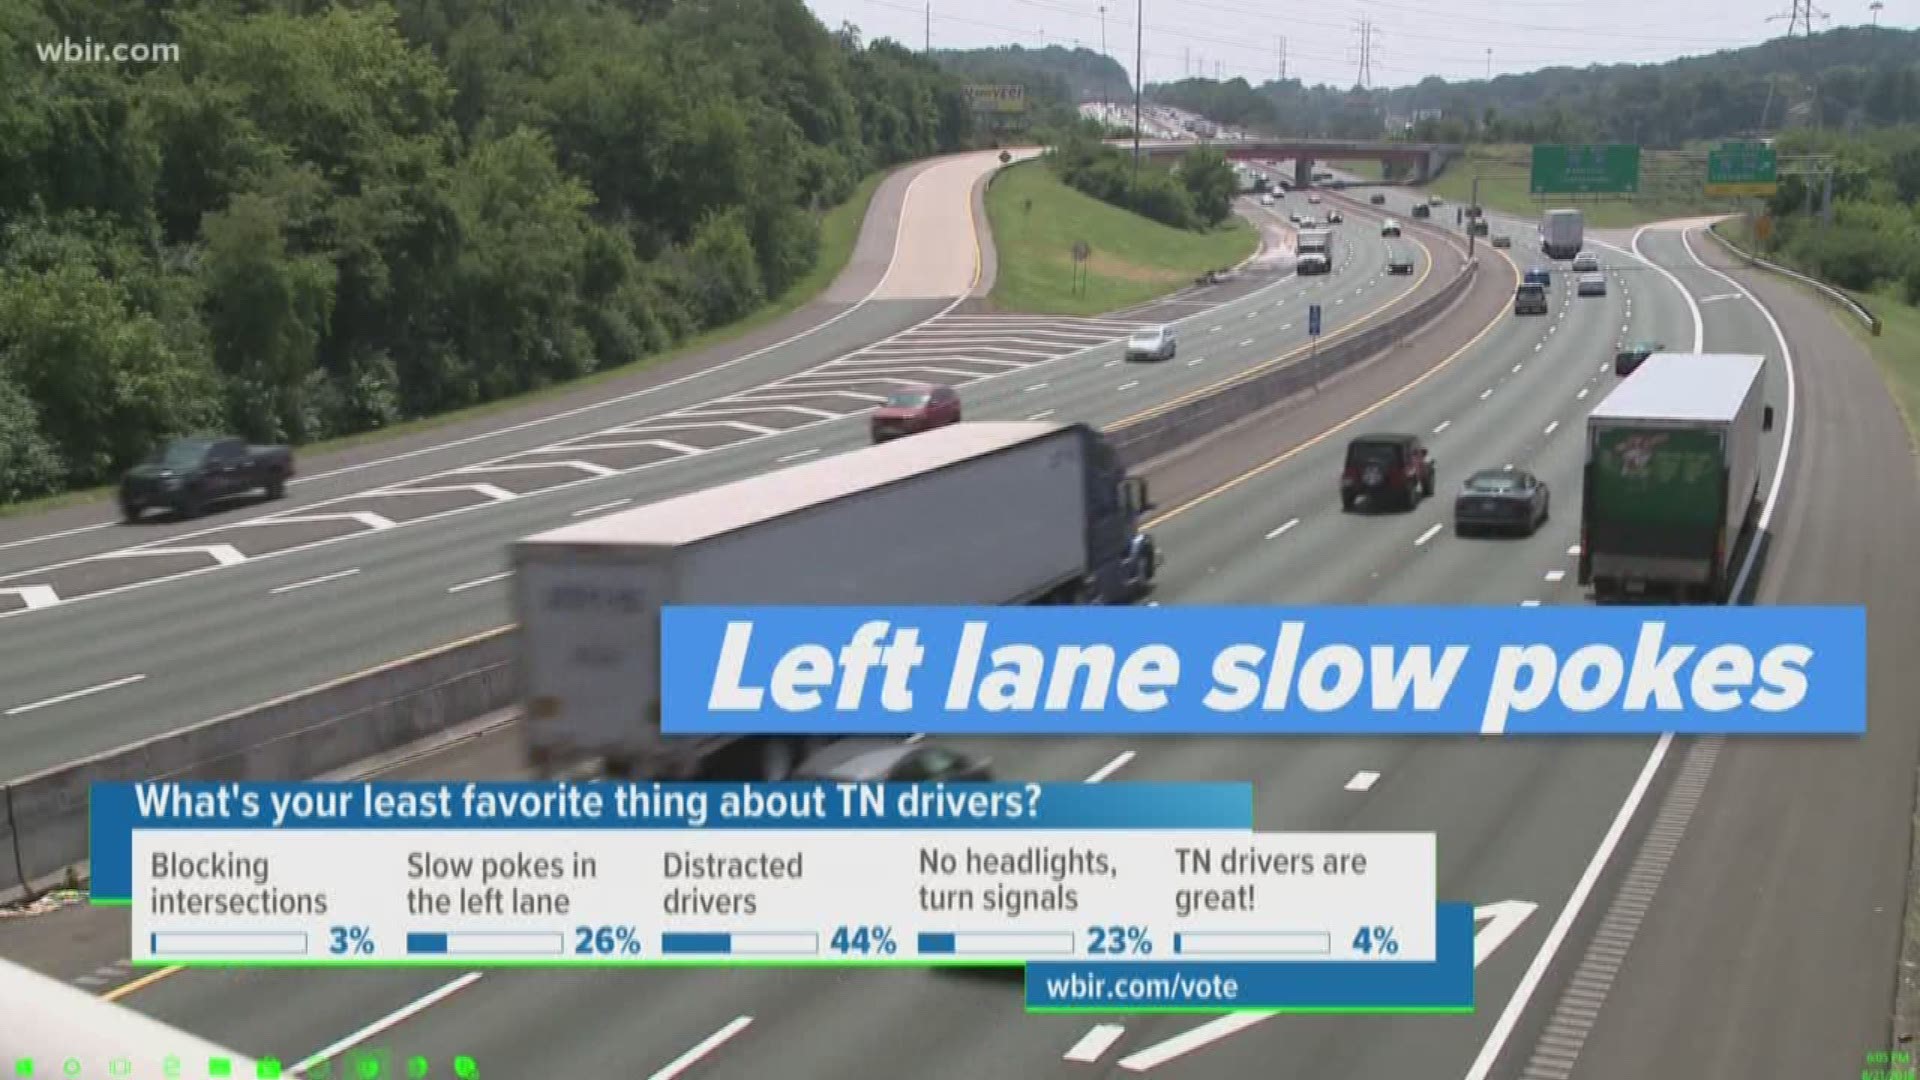 A new study from "smart asset" says Tennessee drivers are the second worst in the country.